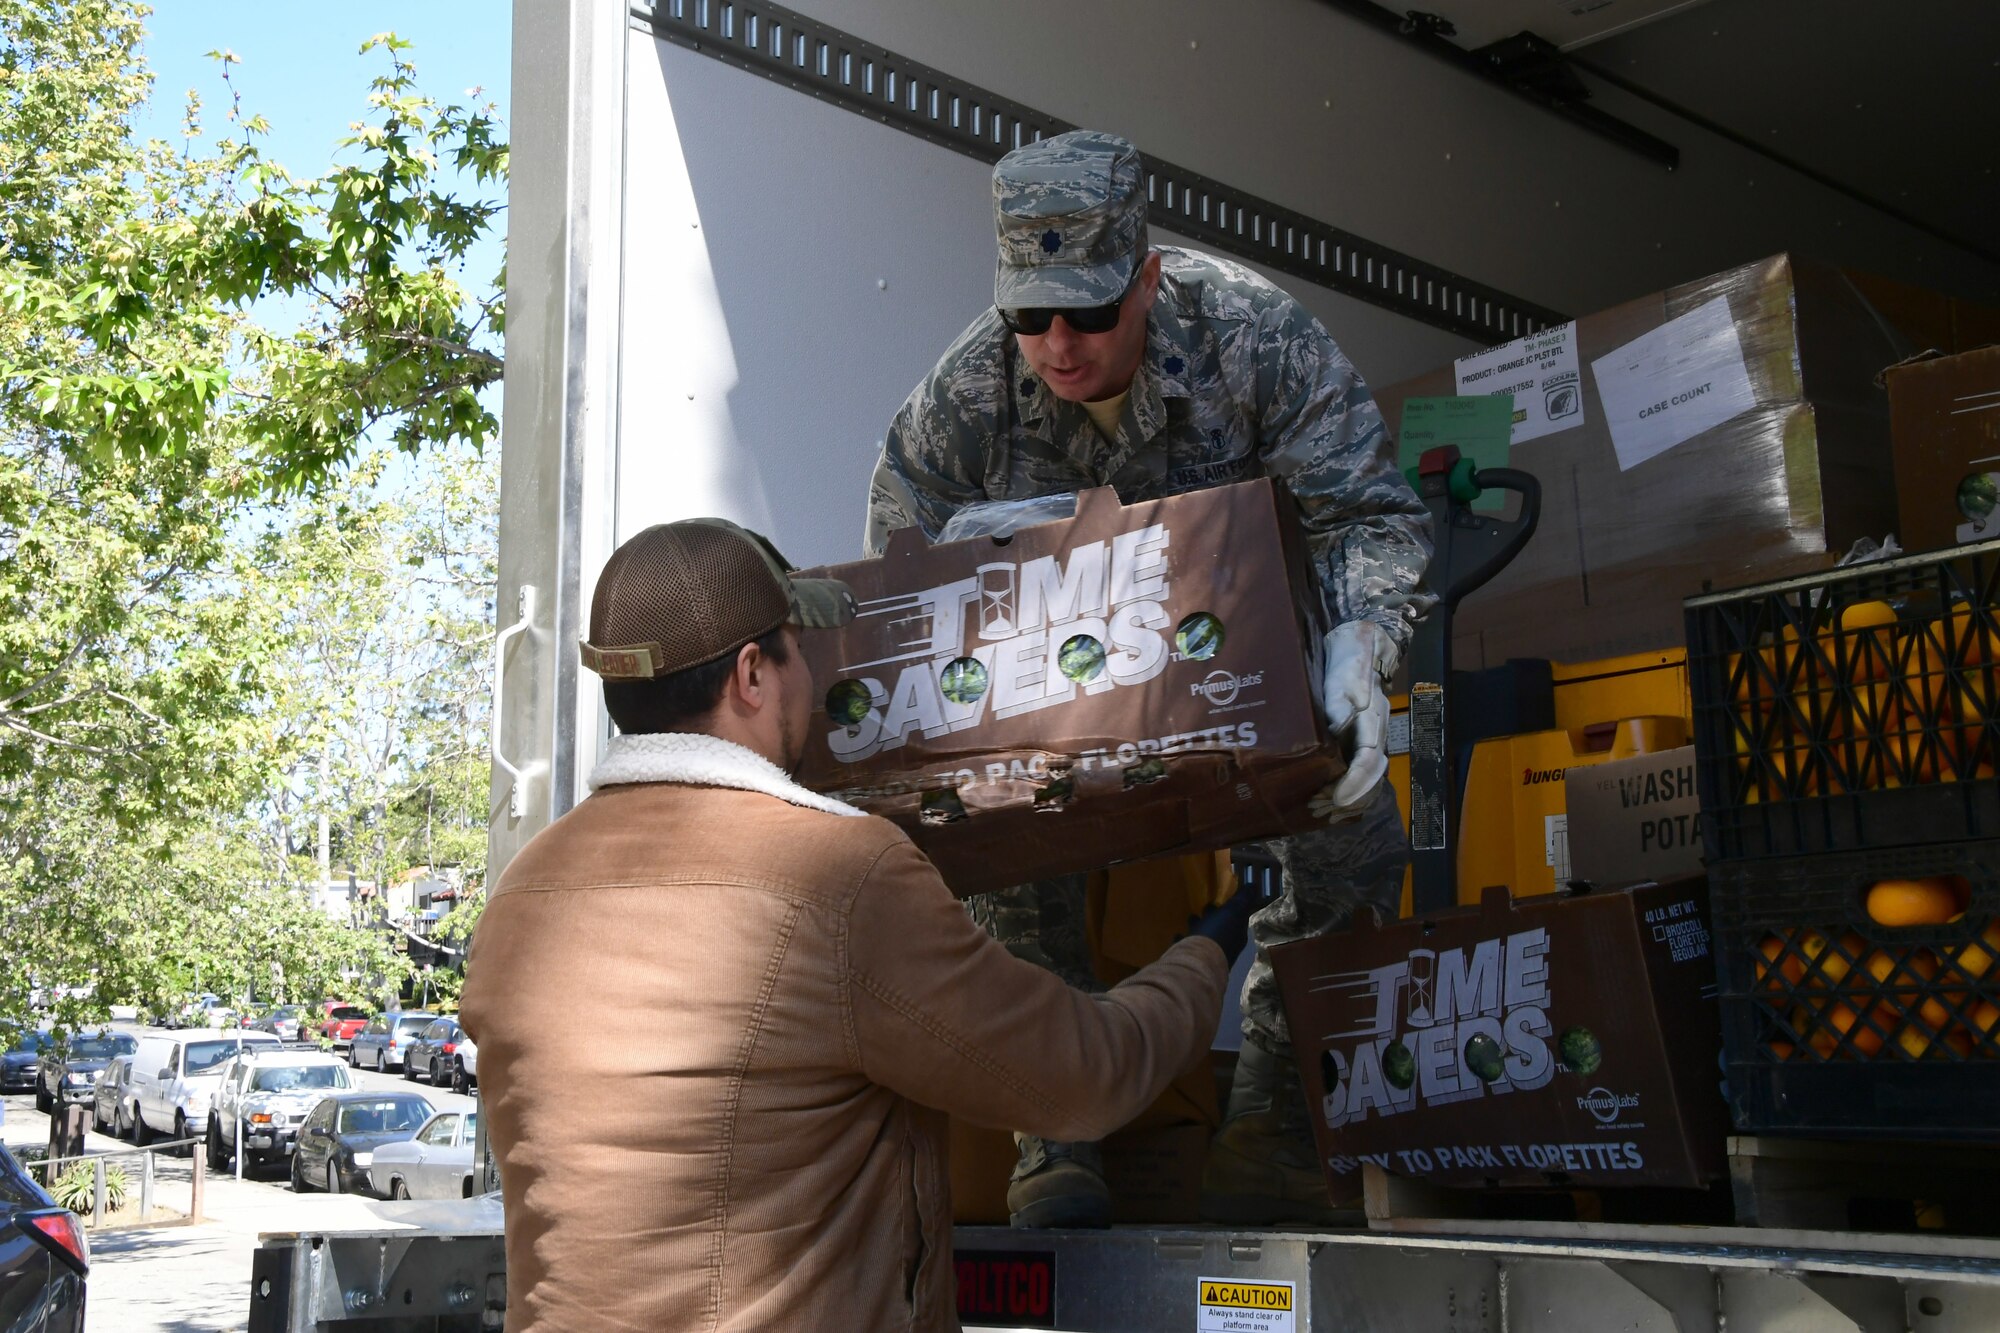 U.S. Air National Guard Lt. Col. Adam Goldstone from the 146th Airlift Wing’s Medical Group (146 MDG), unloads donated food from the back of a Foodbank Santa Barbara delivery truck at the West Boy’s and Girls Club located in Santa Barbara, California. March 27, 2020. Goldstone and California Air National Guardsmen from the 146 MDG assisted Foodbank Santa Barbara delivering food to multiple distribution centers across the city of Santa Barbara to provide food for families and those needing help gathering essential food and goods due to COVID-19. (U.S. Air National Guard photo by Senior Airman Michelle Ulber)